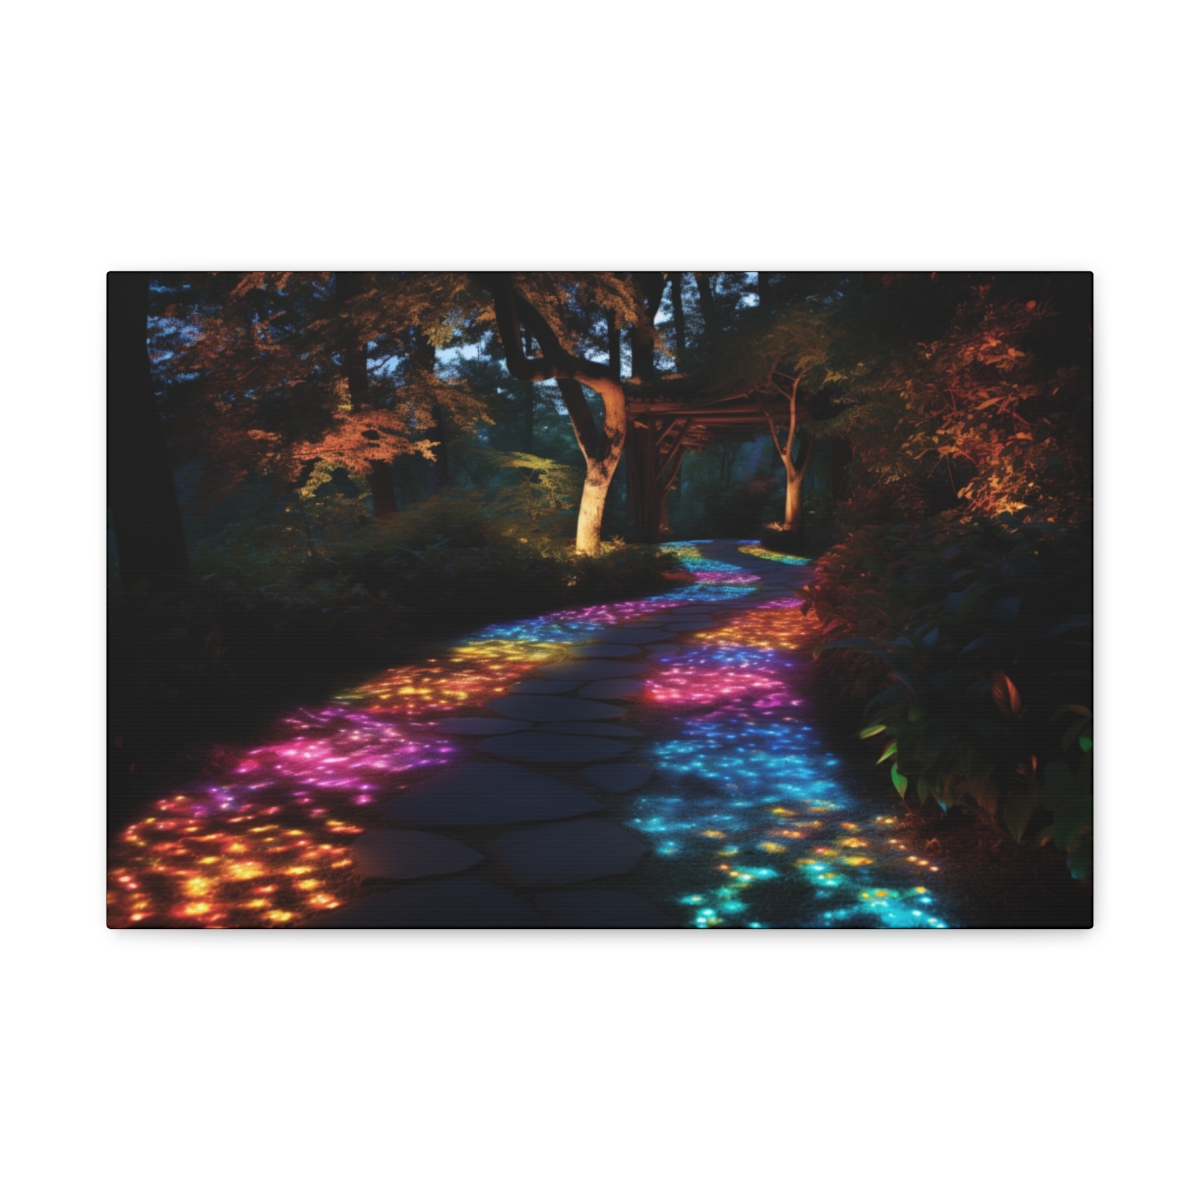 Fantasy Forest Art Canvas Print: Friendship From The Forest